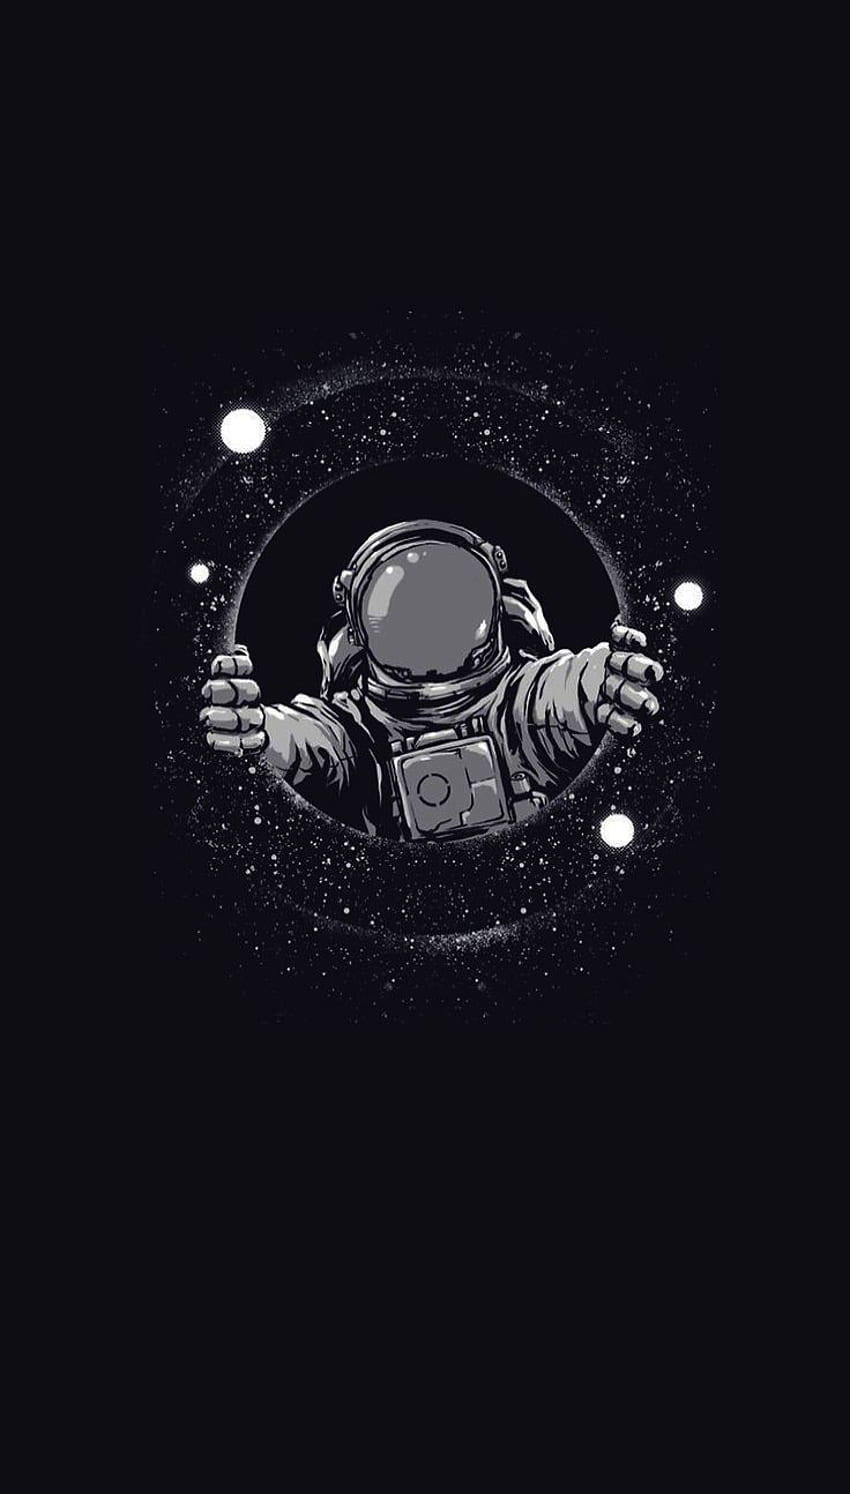 Cute For iPhone 6 about Gadgets Dad Gifts not Aesthetic For iPhone Xs Max pa. Space drawings, Black iphone, Astronaut, Dark Fox HD phone wallpaper